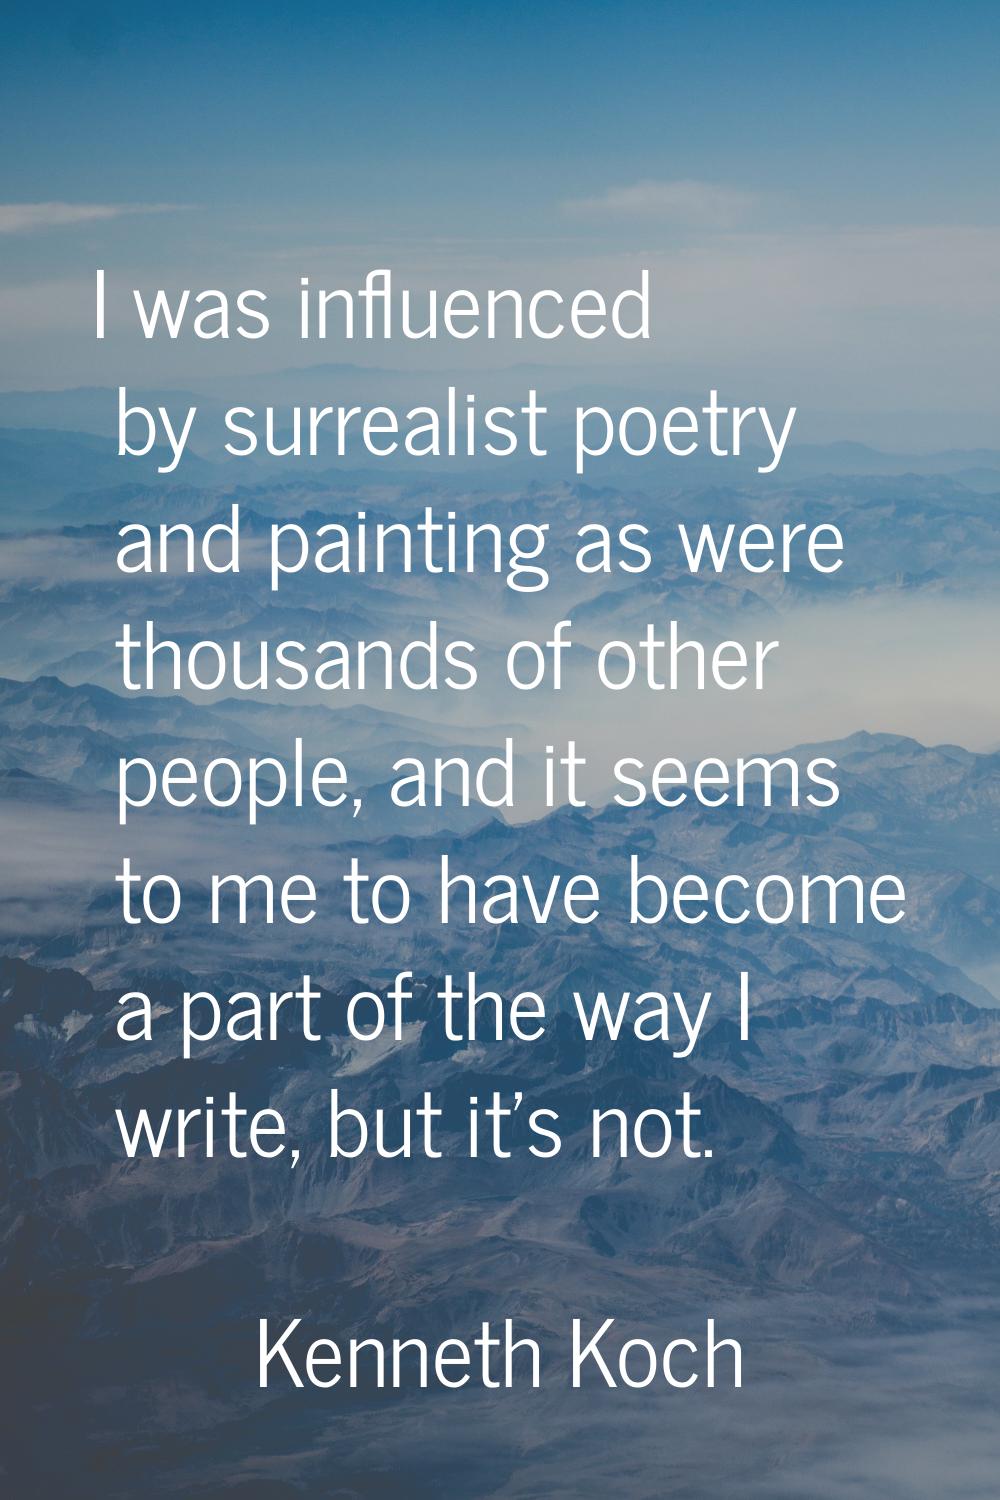 I was influenced by surrealist poetry and painting as were thousands of other people, and it seems 